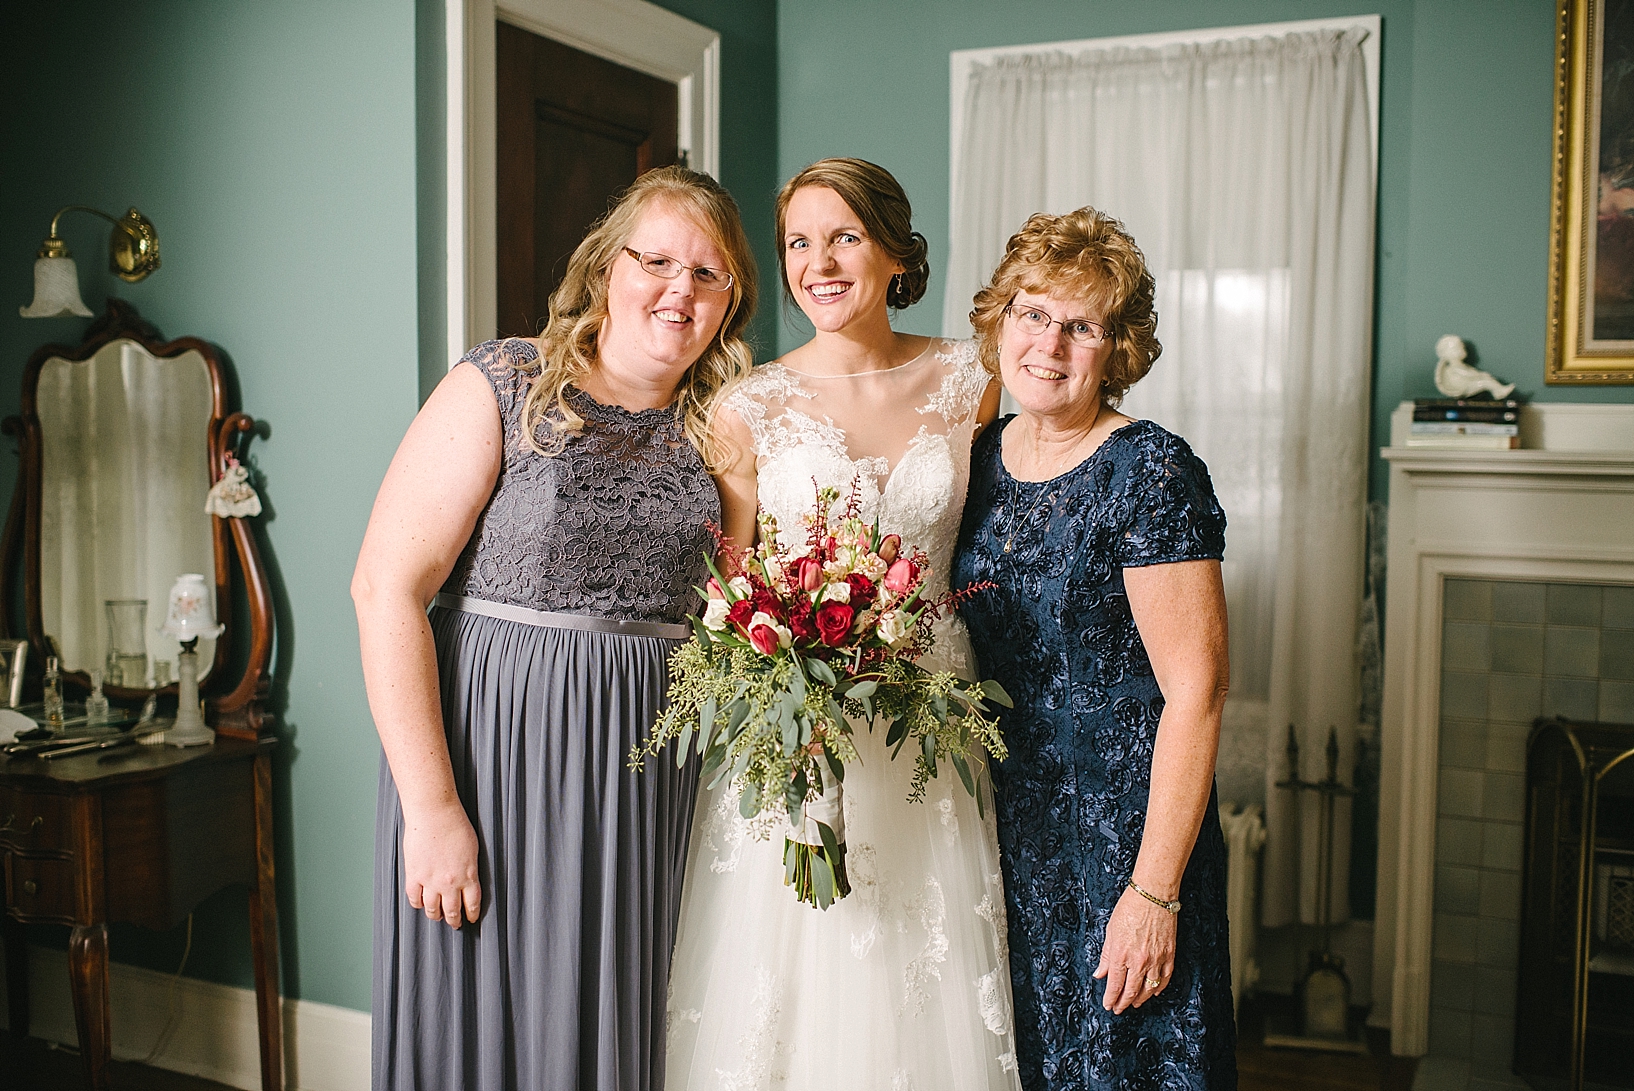 bride holding bouquet standing next to mother in navy dress and sister in gray lace dress